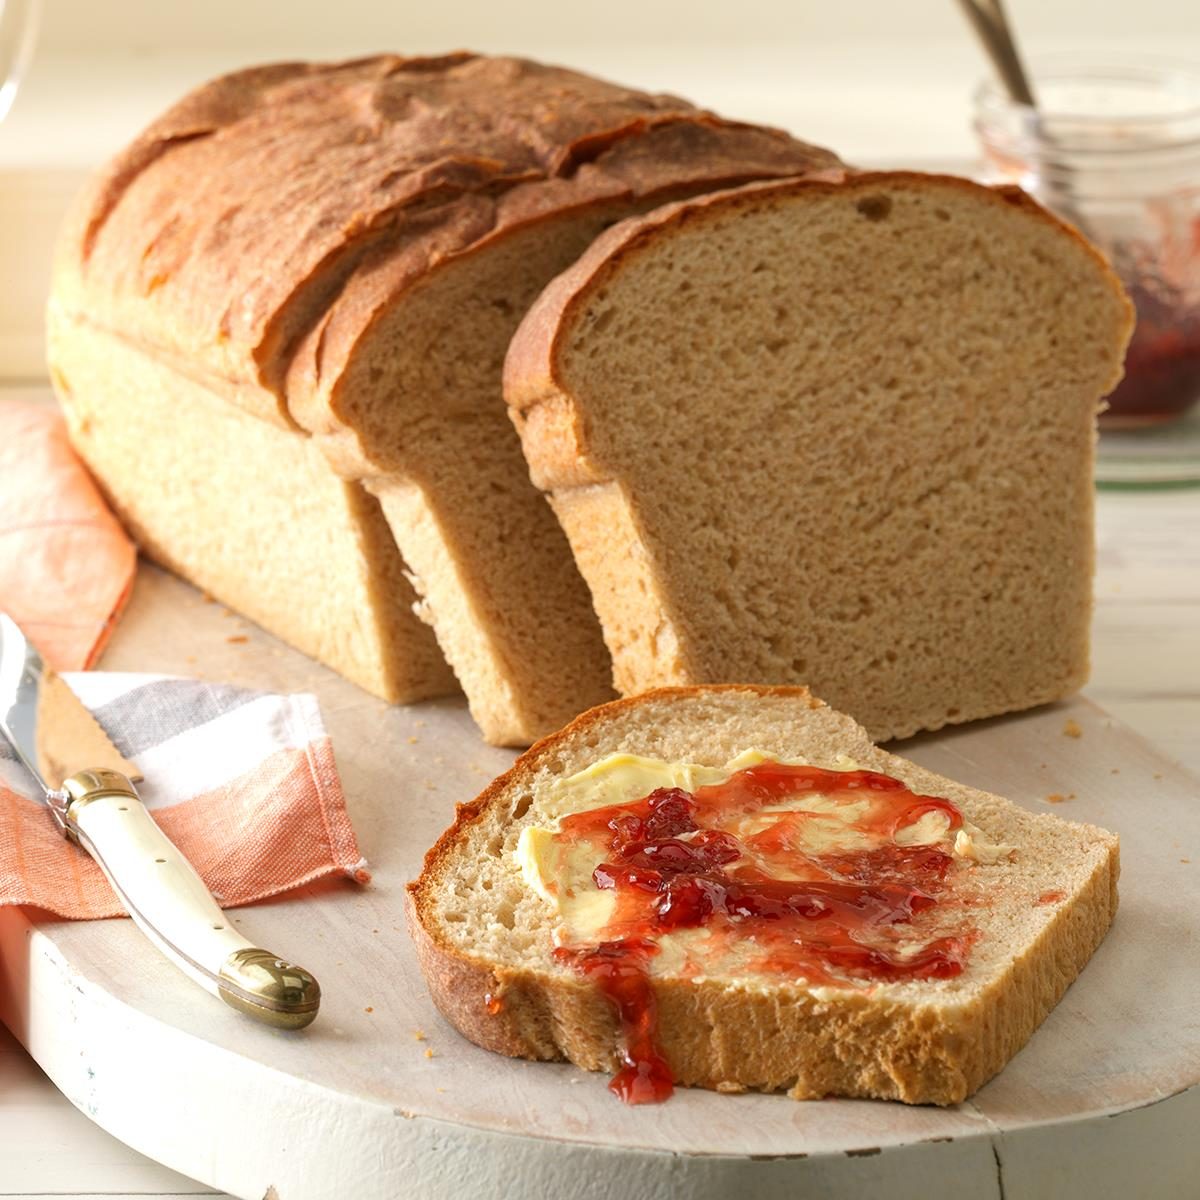 Undercooked Bread? This Is How to Fix a Baking Mishap